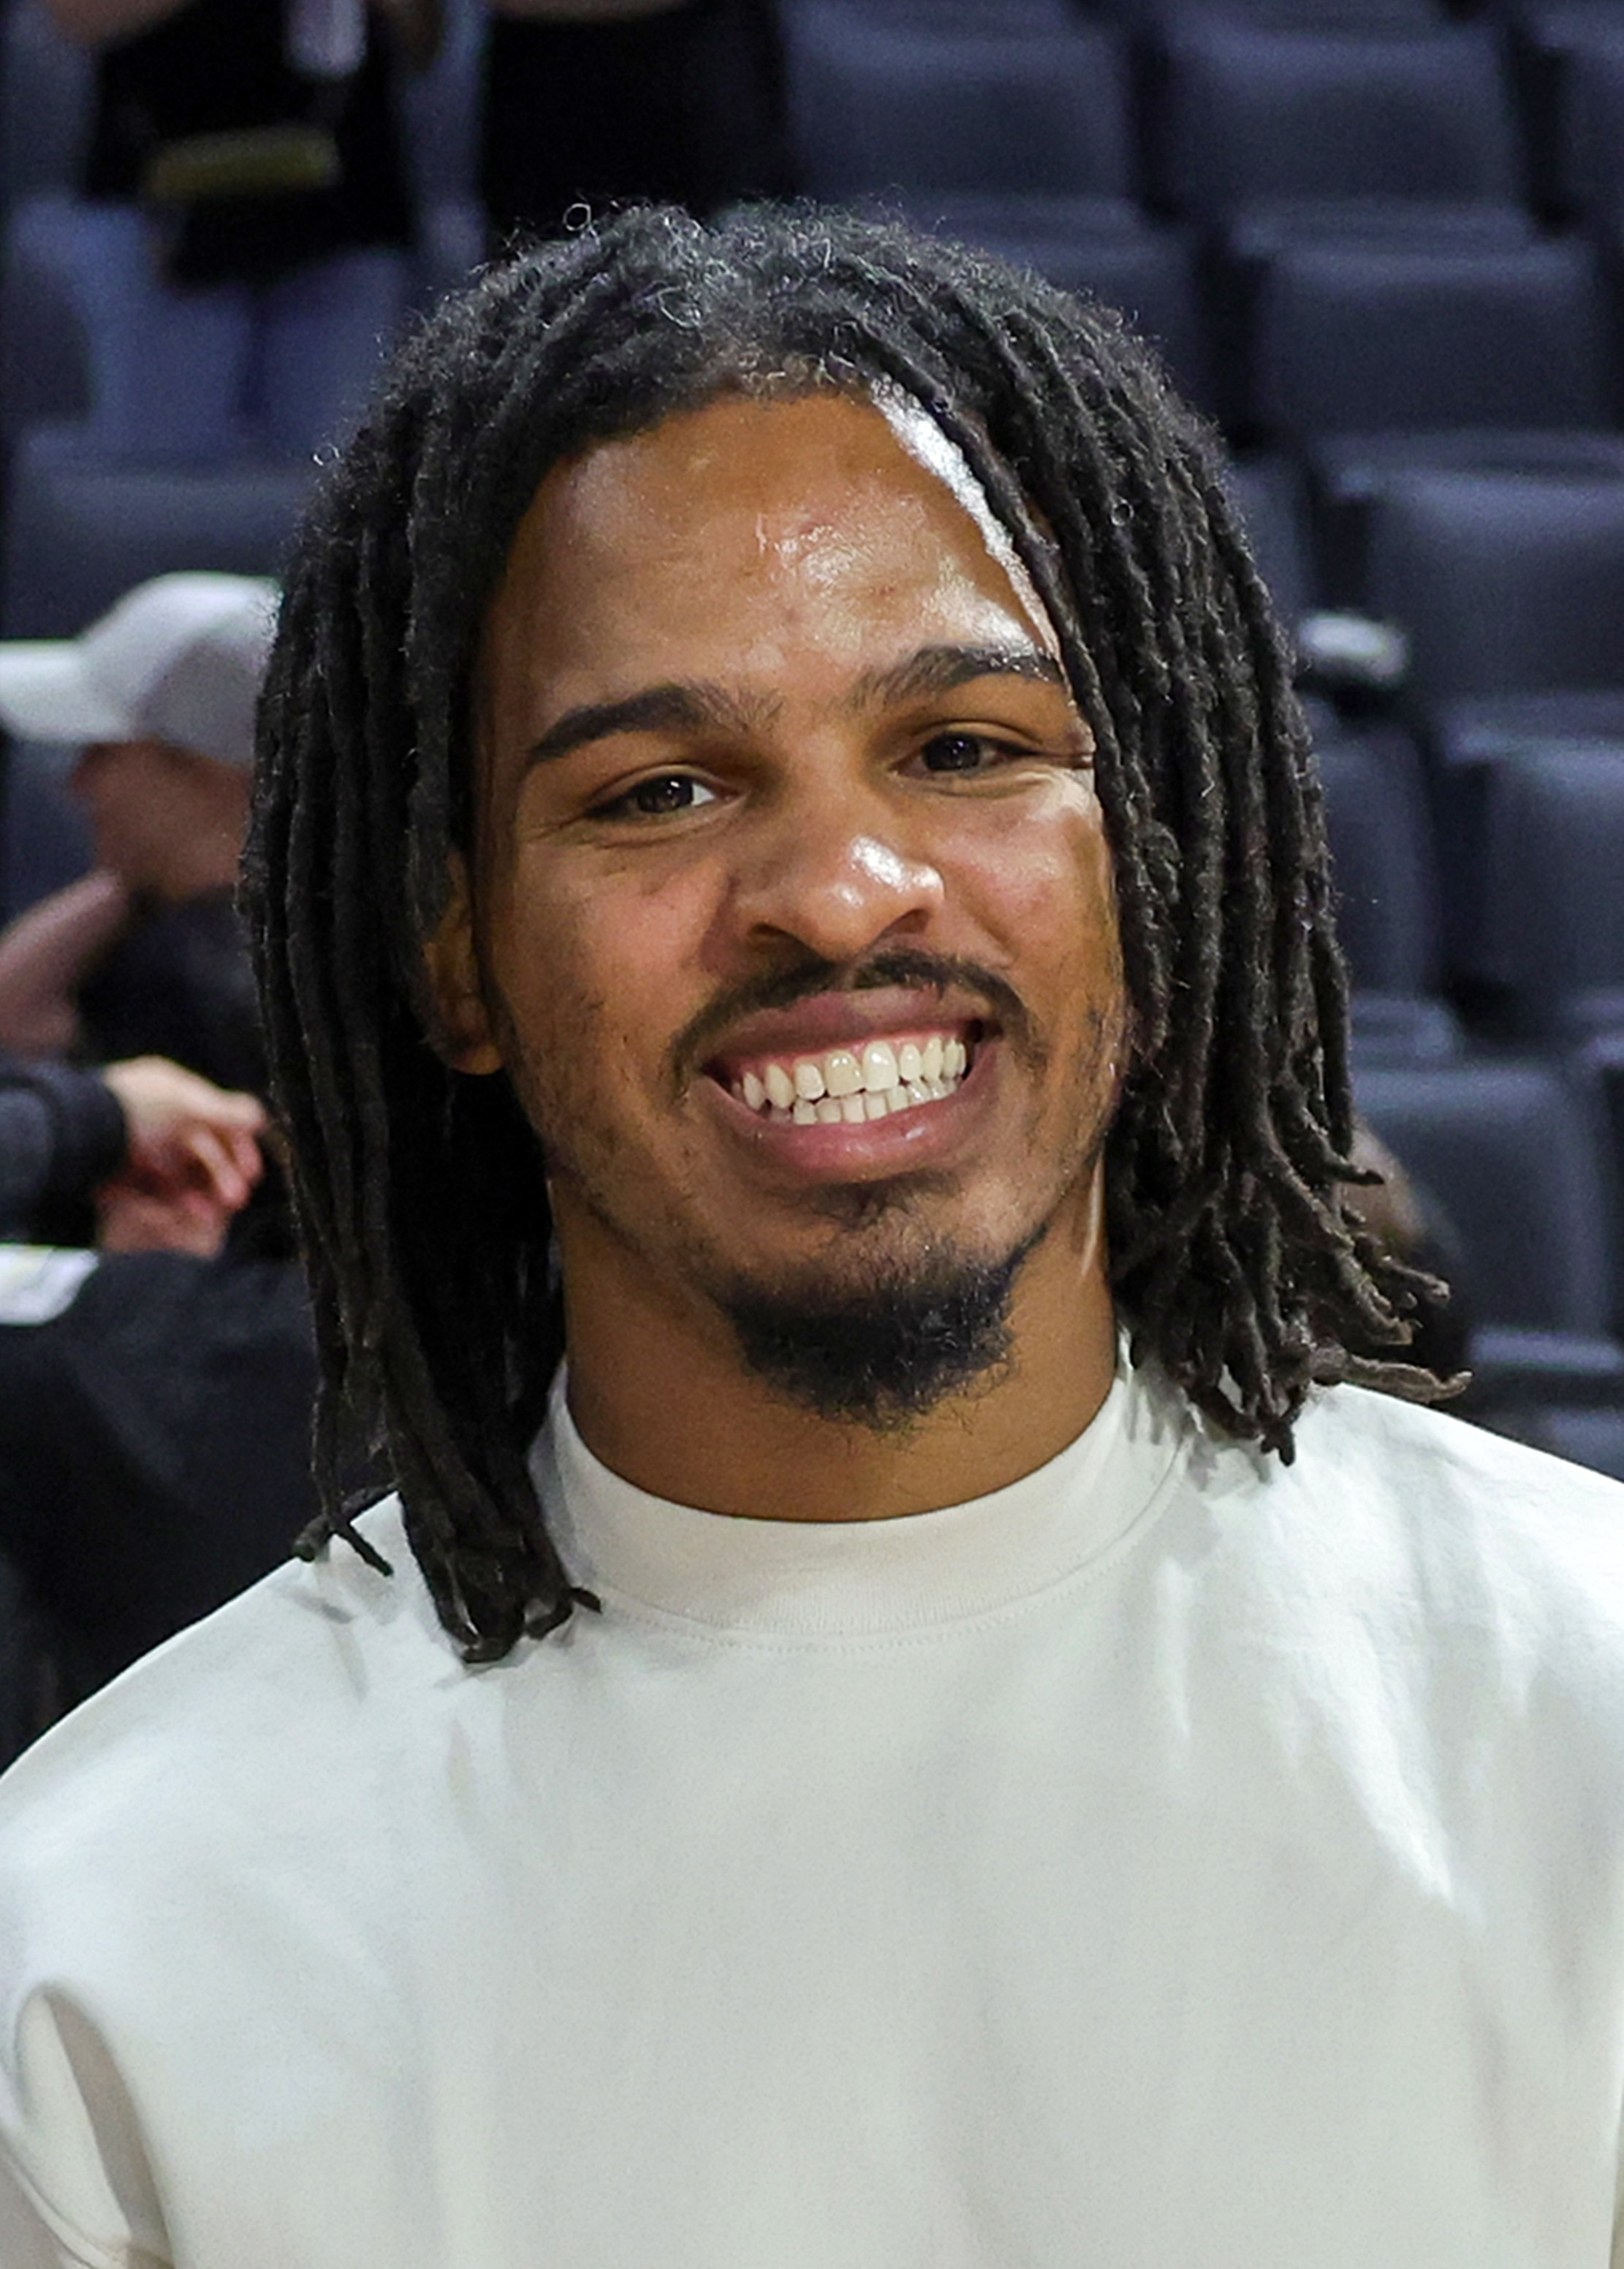 Man with dreadlocks smiling at the camera, wearing a plain shirt, at an indoor event